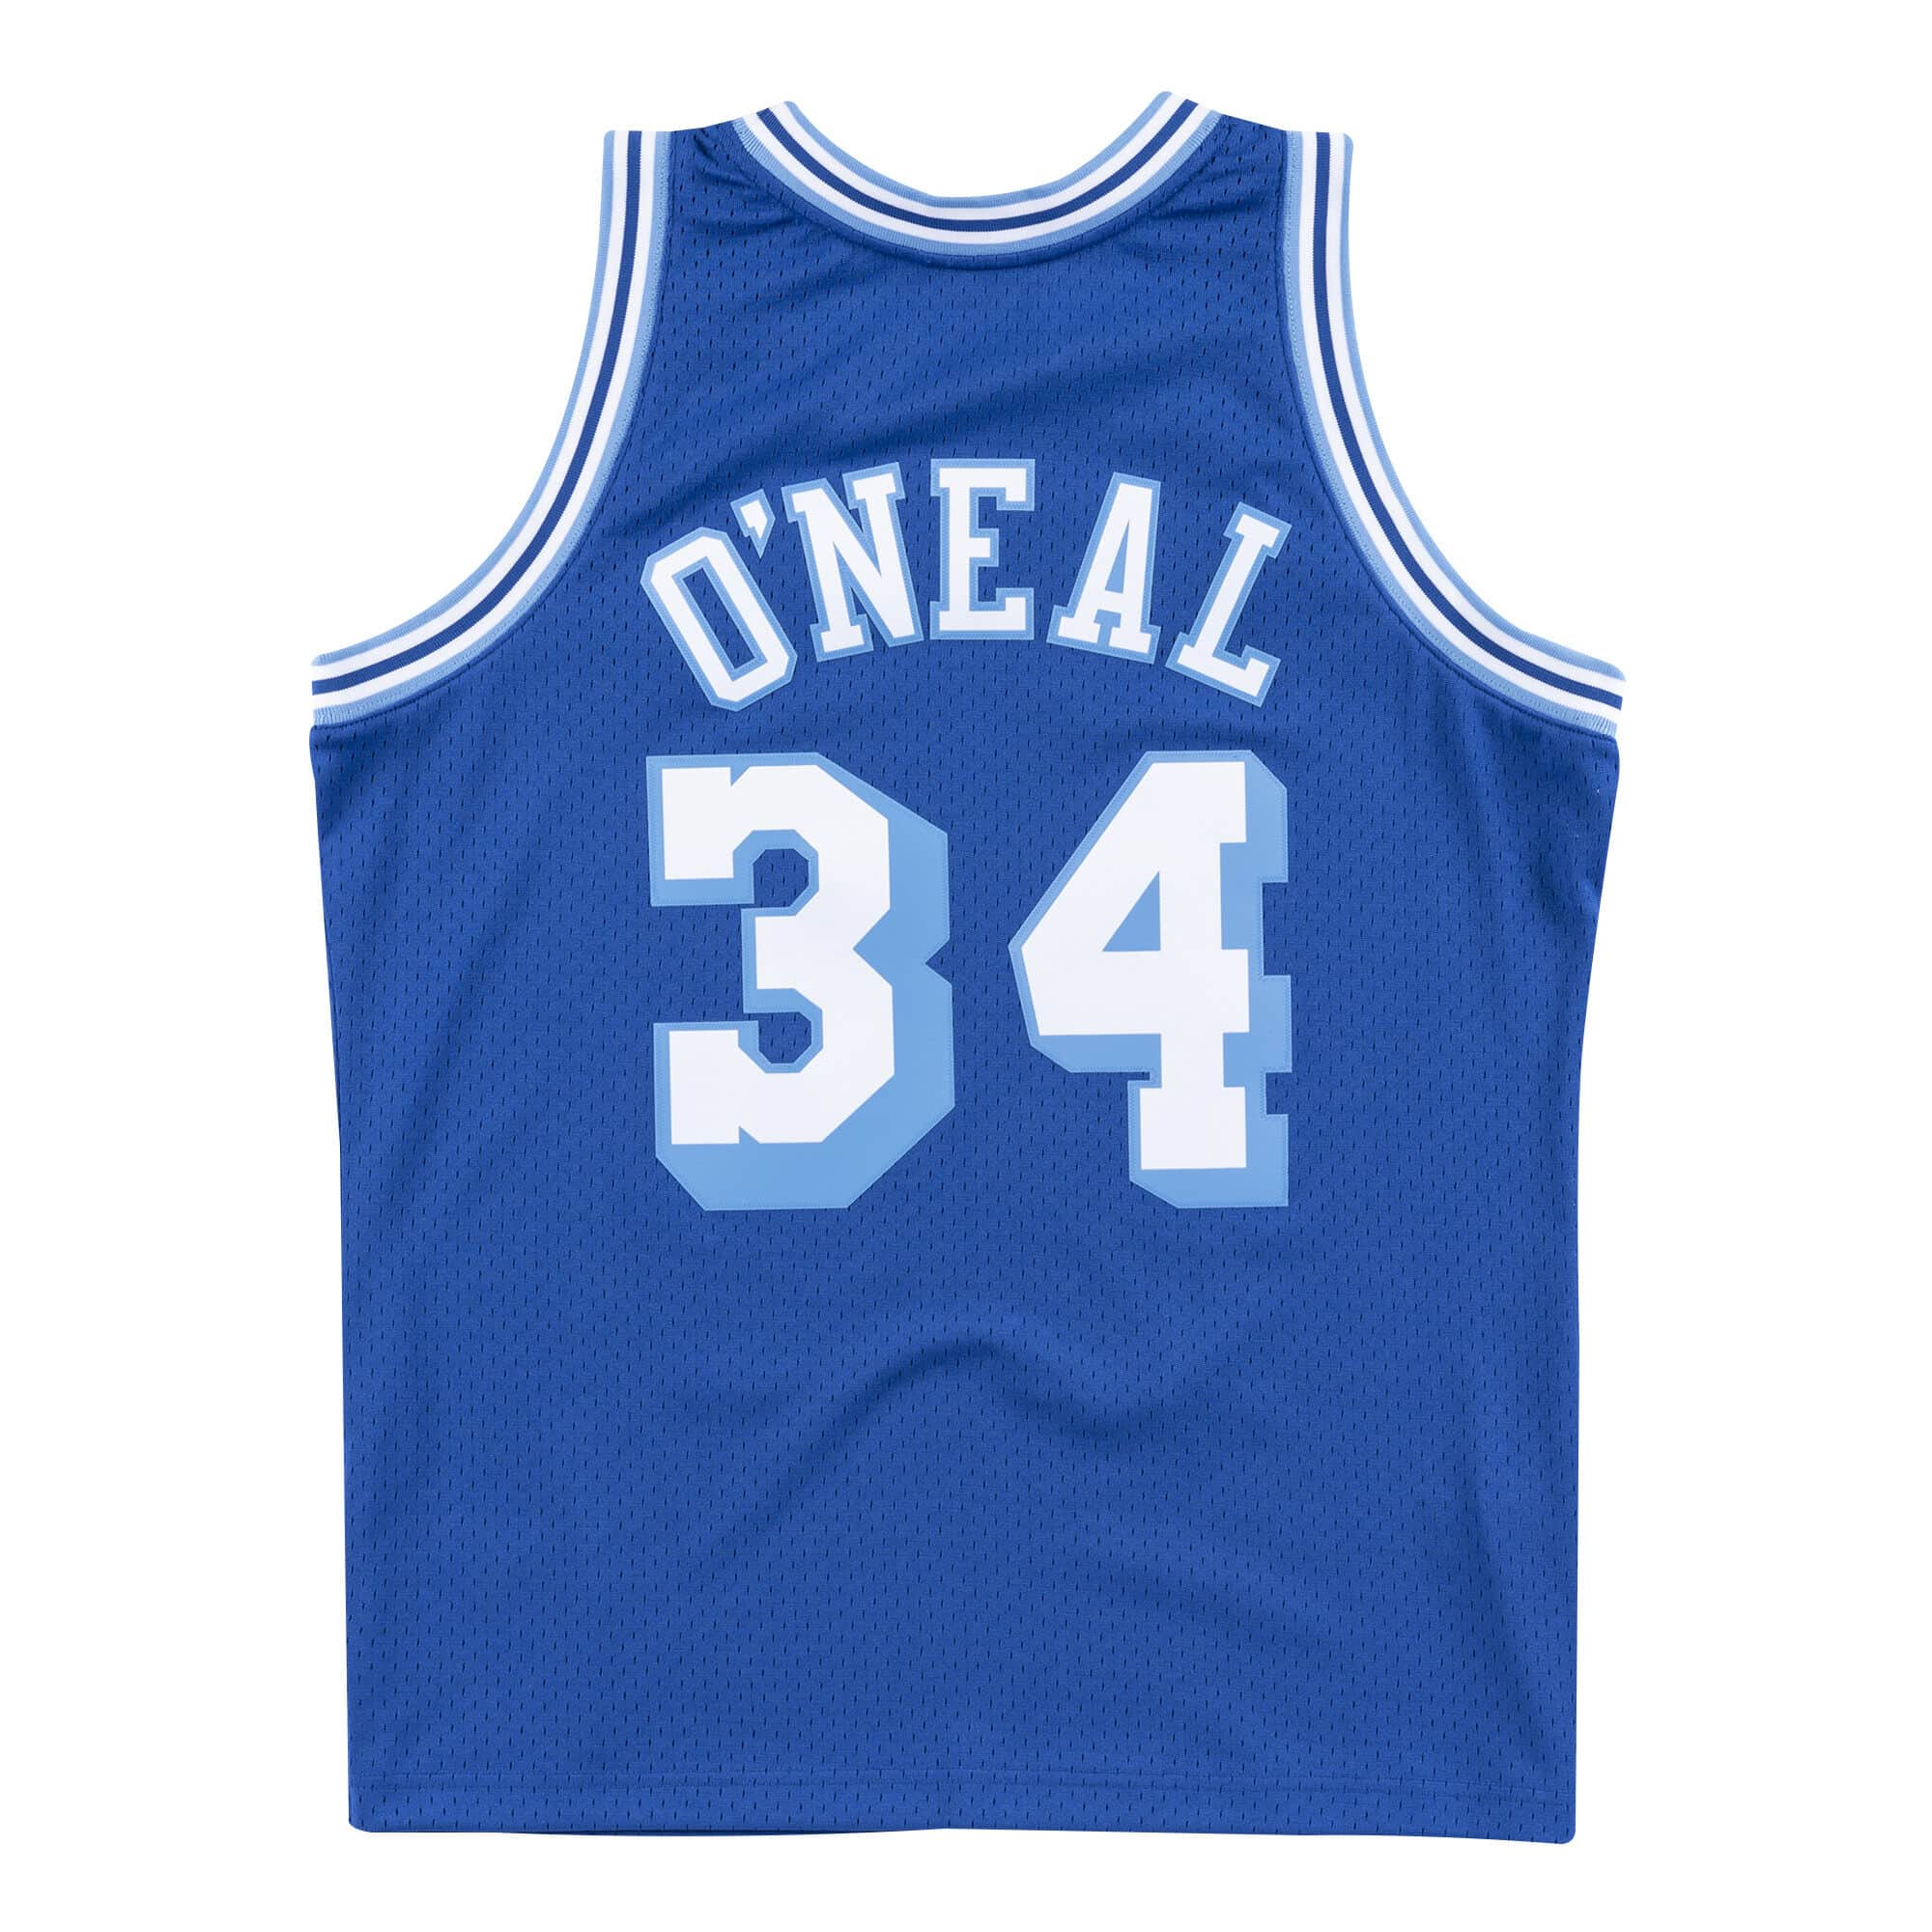 MITCHELL & NESS BLUE NBA LOS ANGELES LAKERS ALTERNATE 1996-97 SHAQUILLE O'NEAL SWINGMAN JERSEY